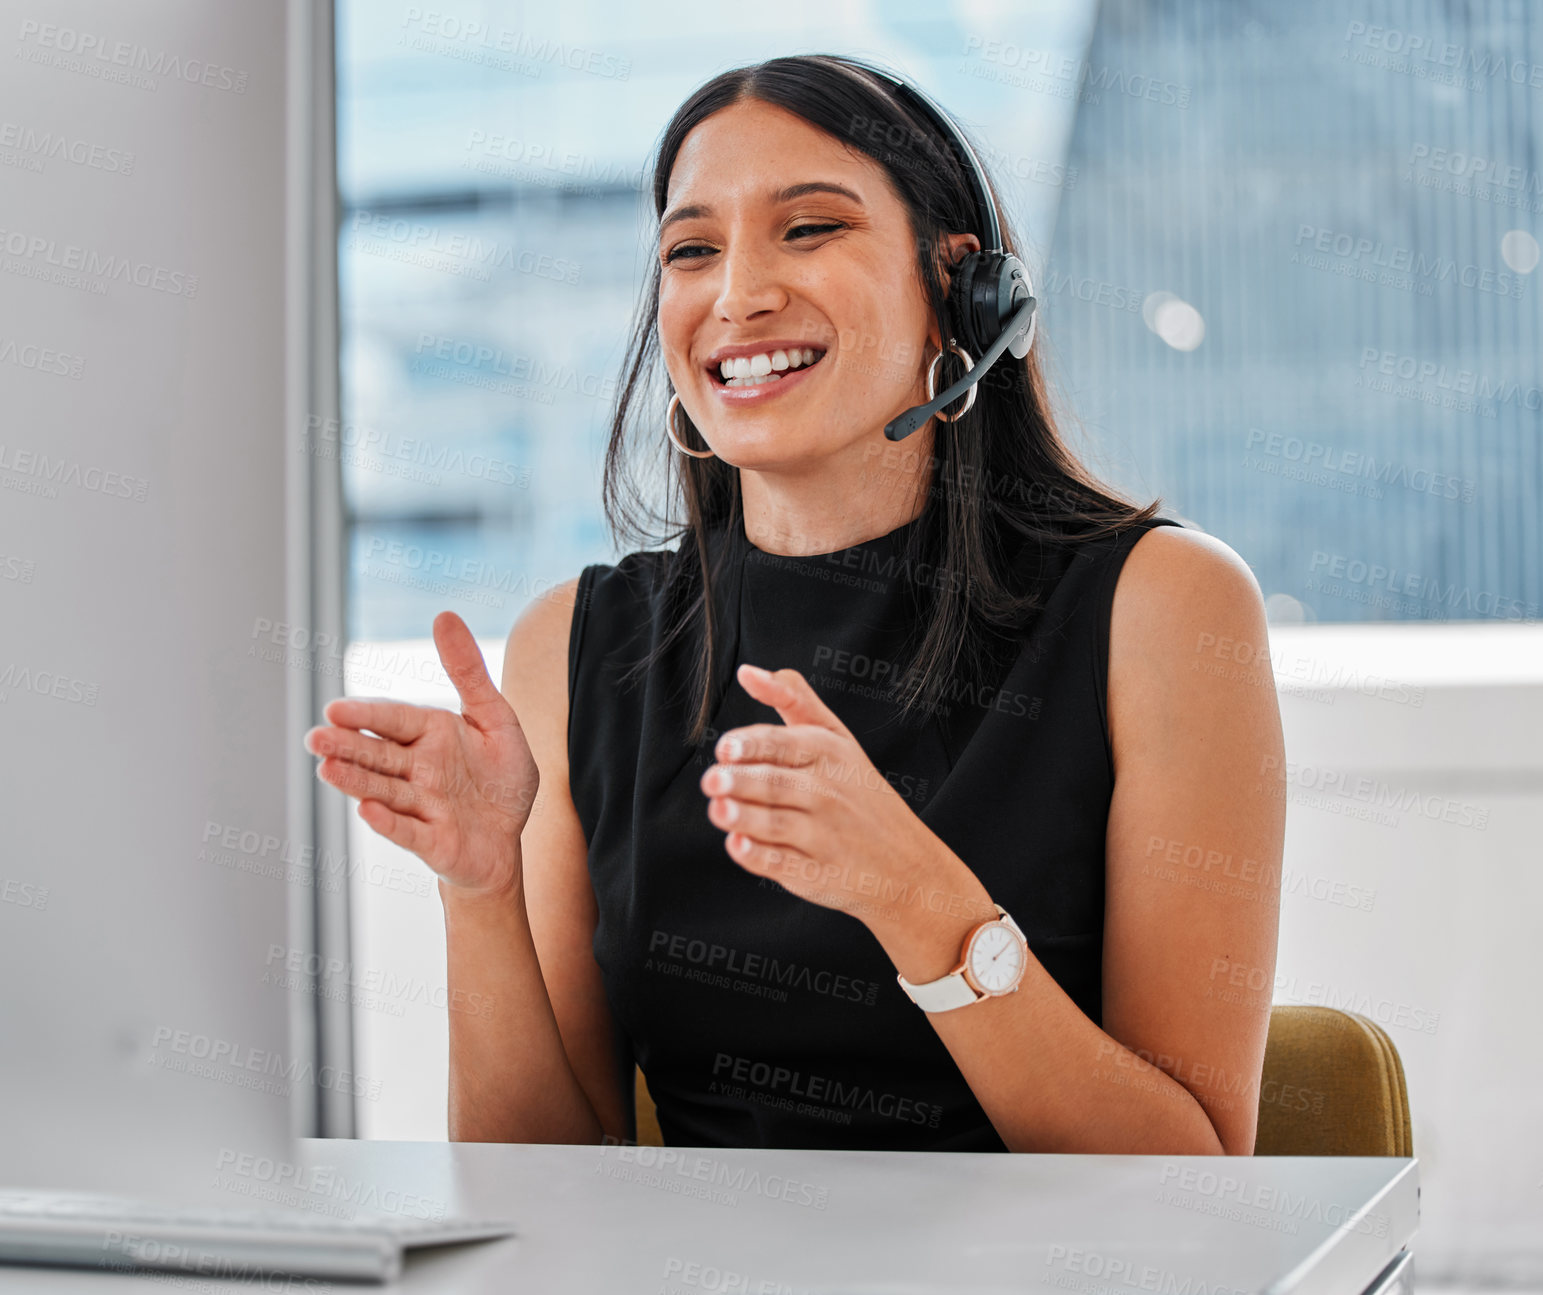 Buy stock photo Shot of a young woman using a headset and computer
at work in a modern office